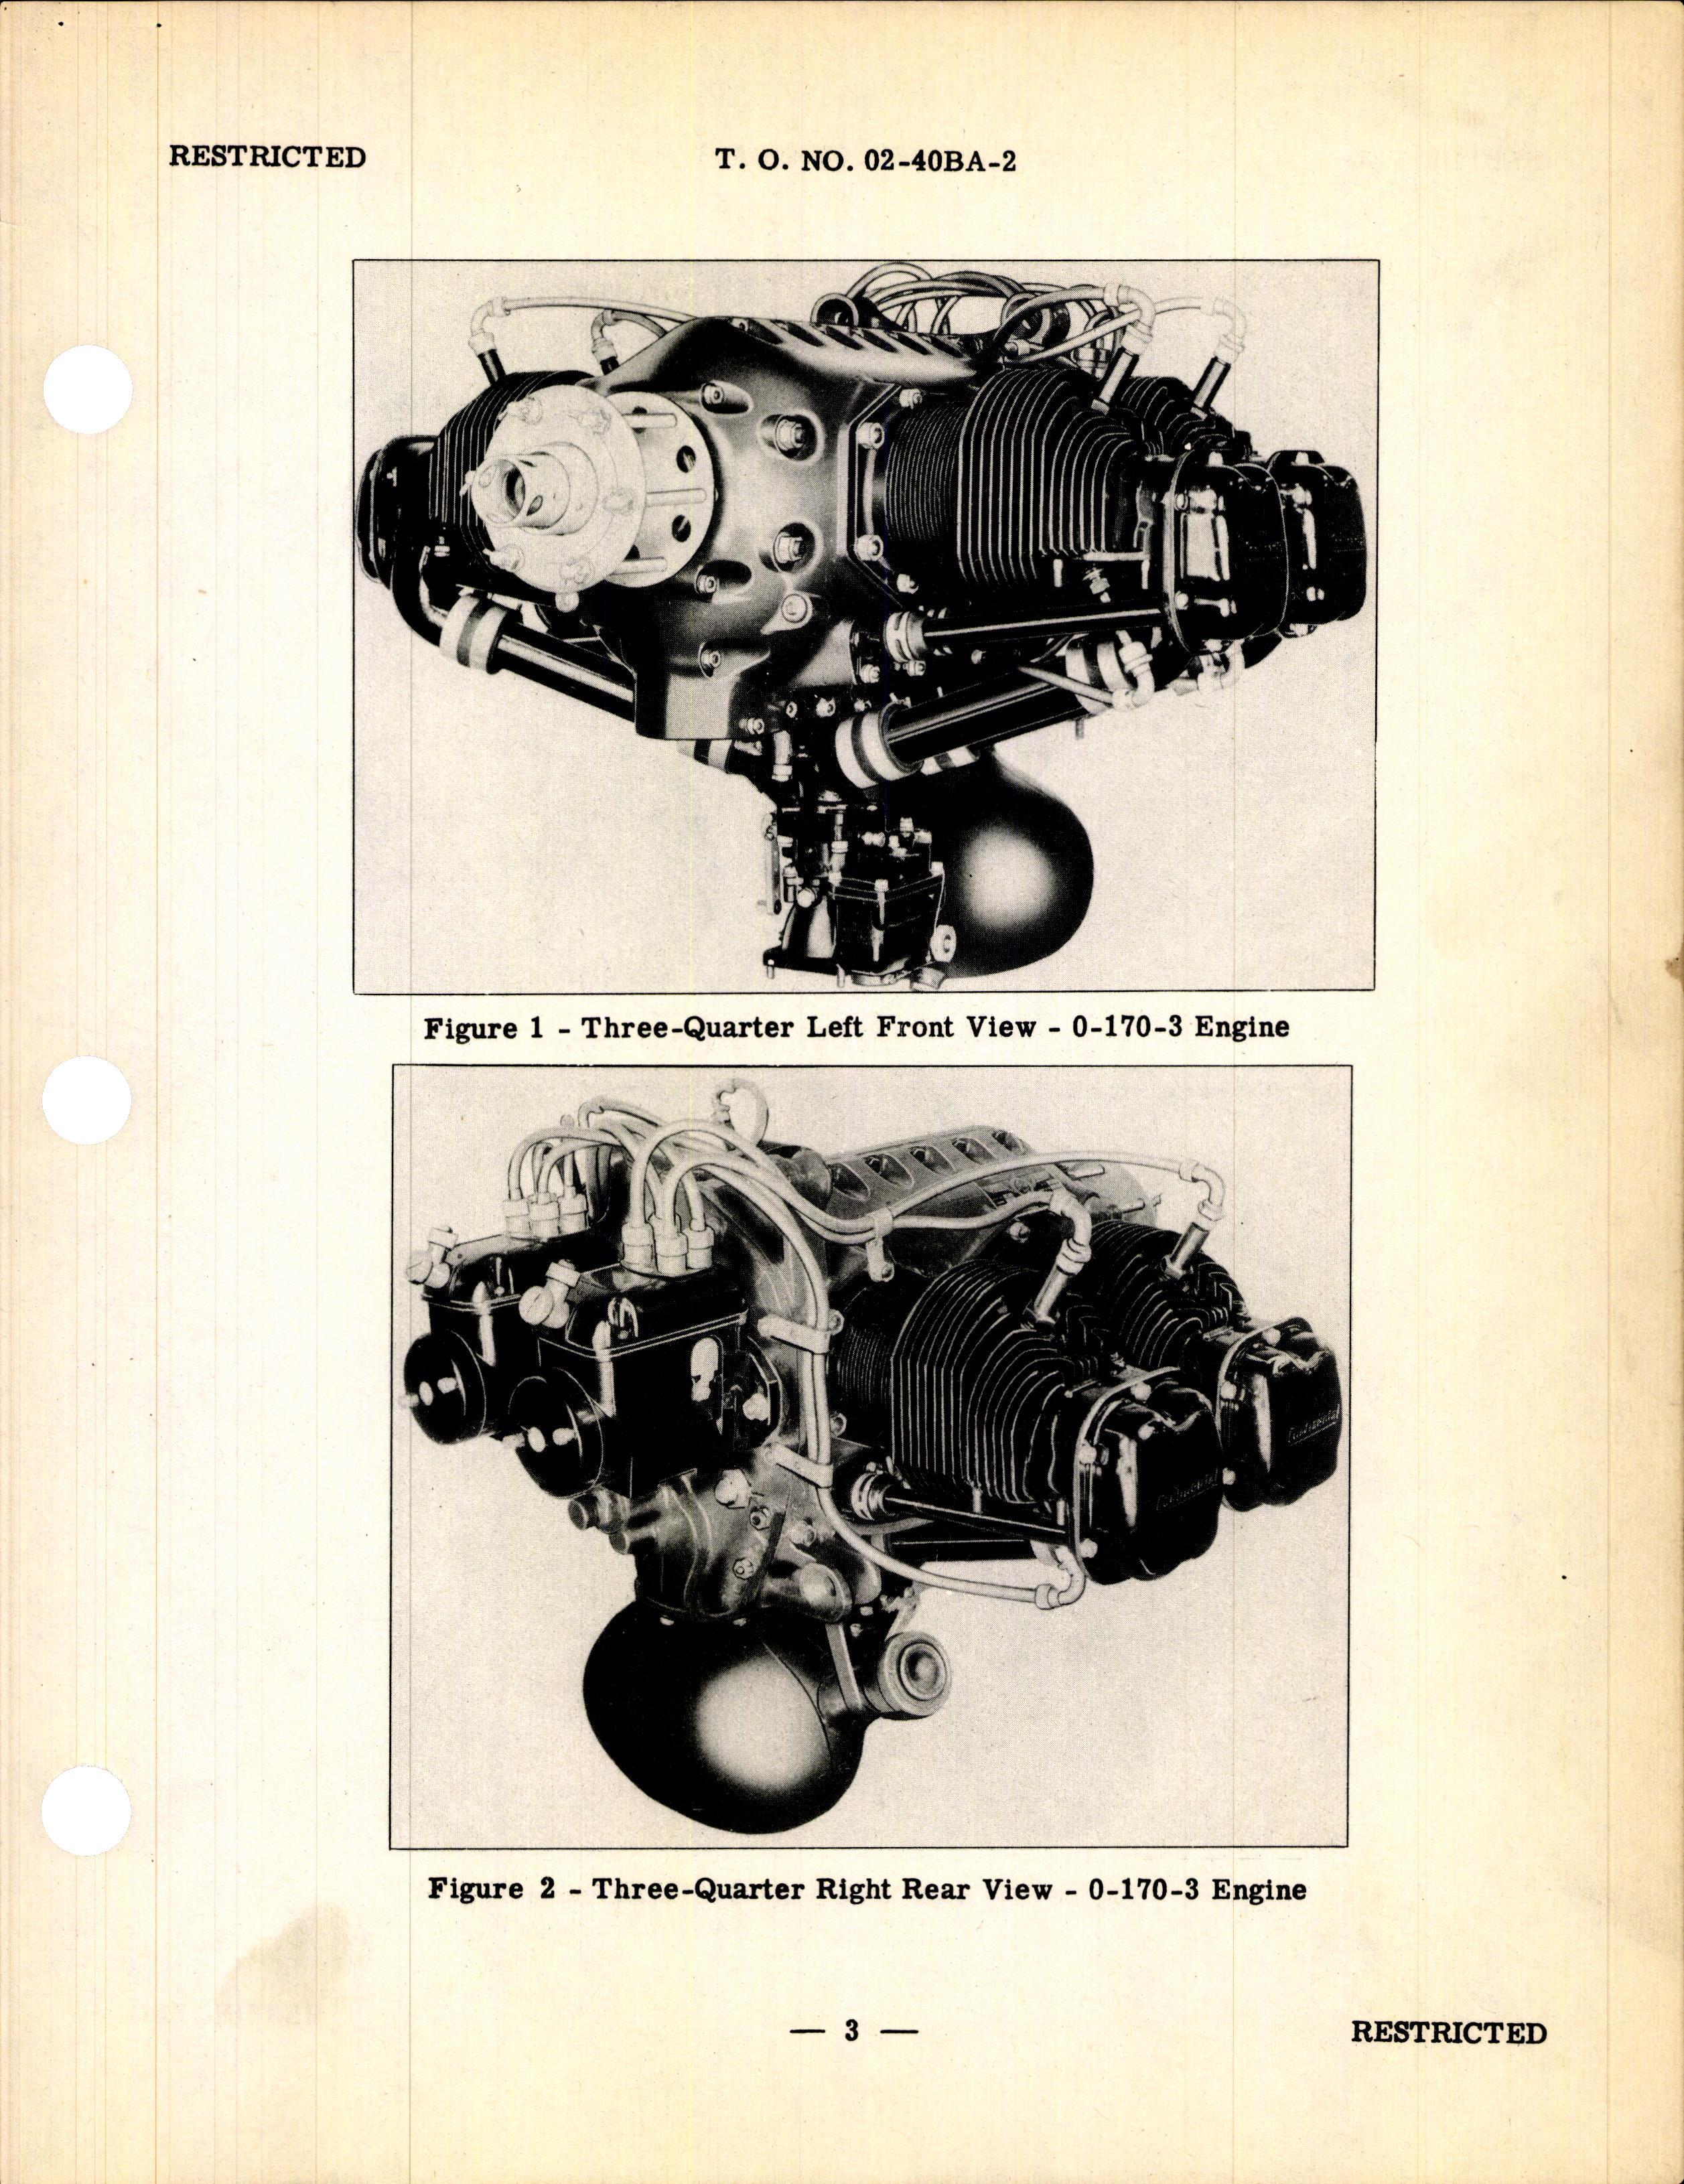 Sample page 5 from AirCorps Library document: Service Instructions for the Model 0-170-3 Engine & Associated Models